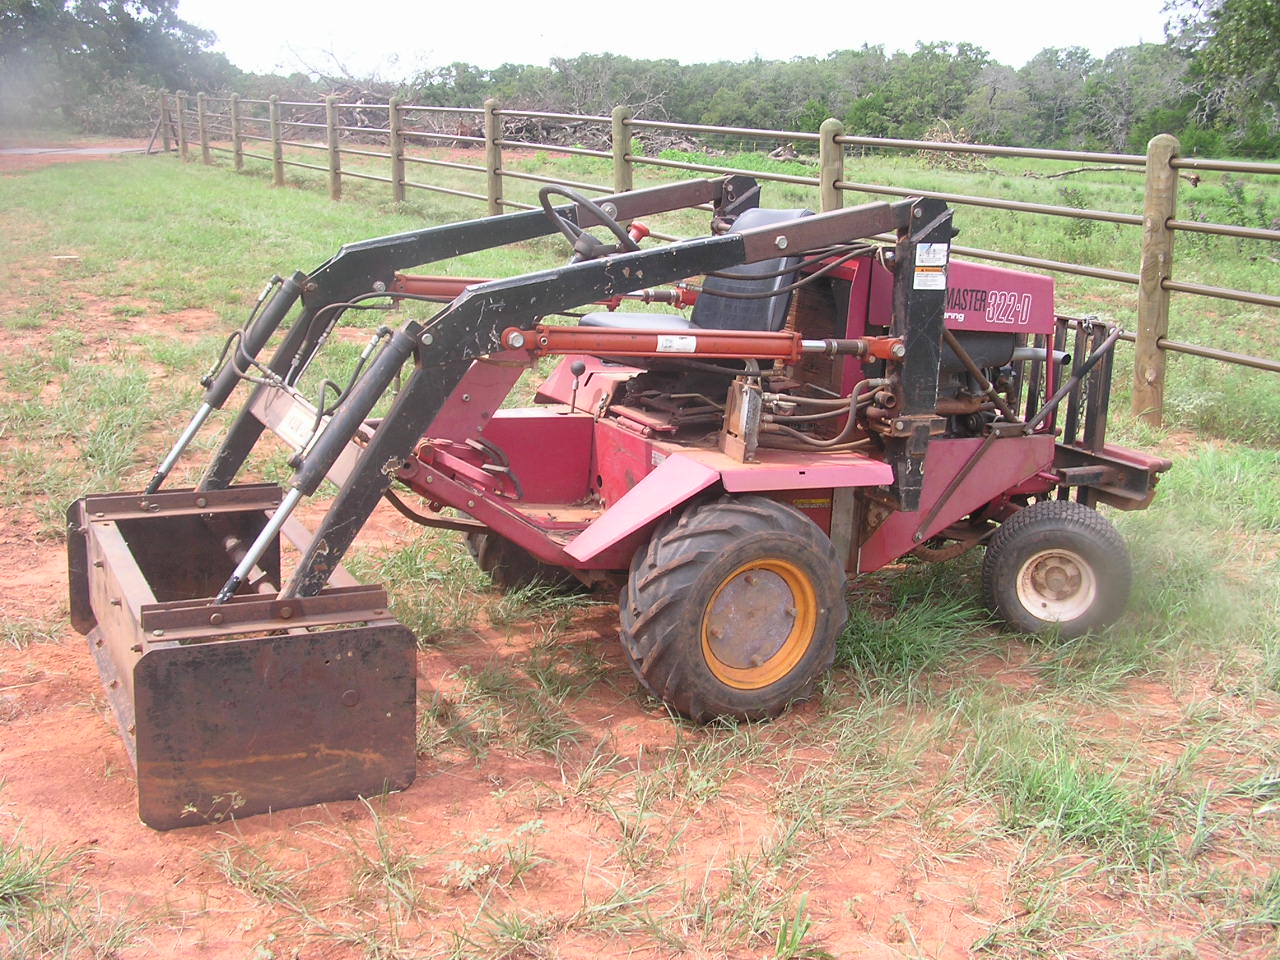 Best Modadd On To Compact Tractor Or Attachment Page 9 Tractorbynet